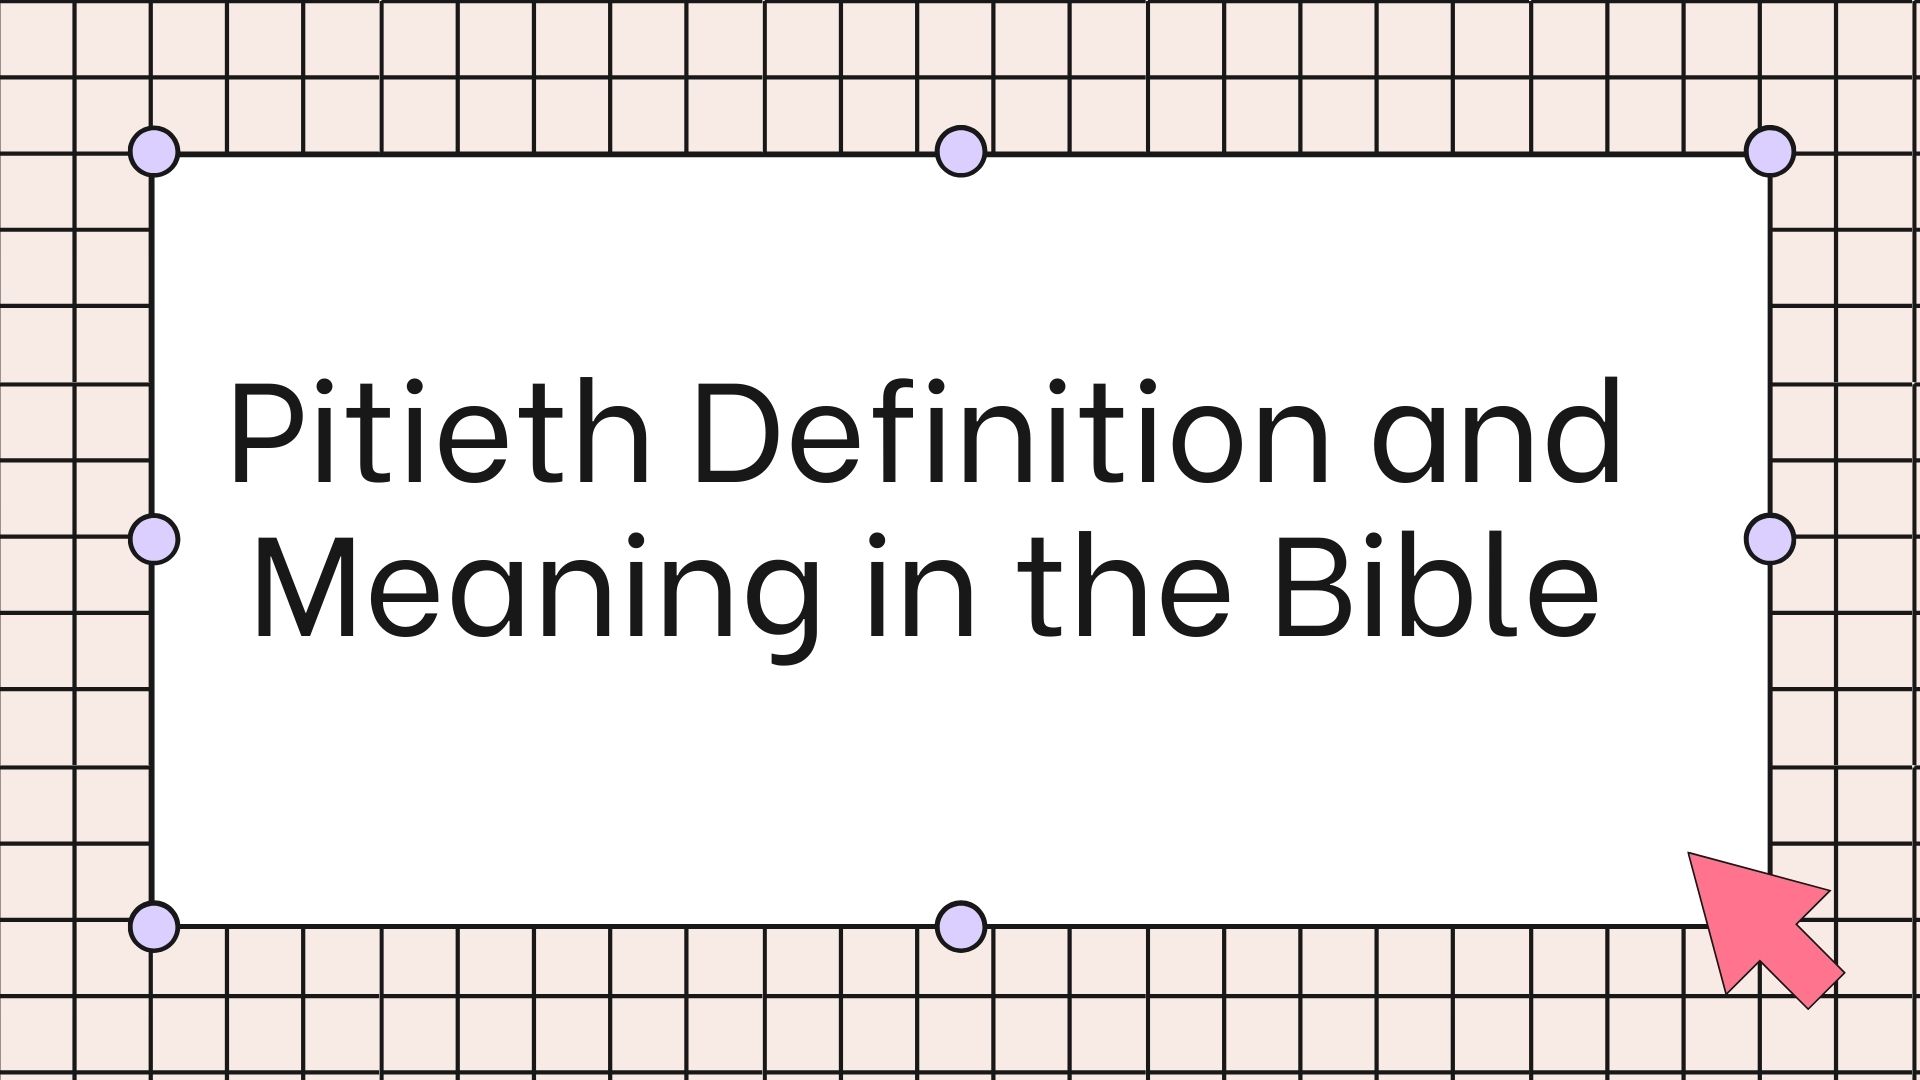 Pitieth Definition and Meaning in the Bible